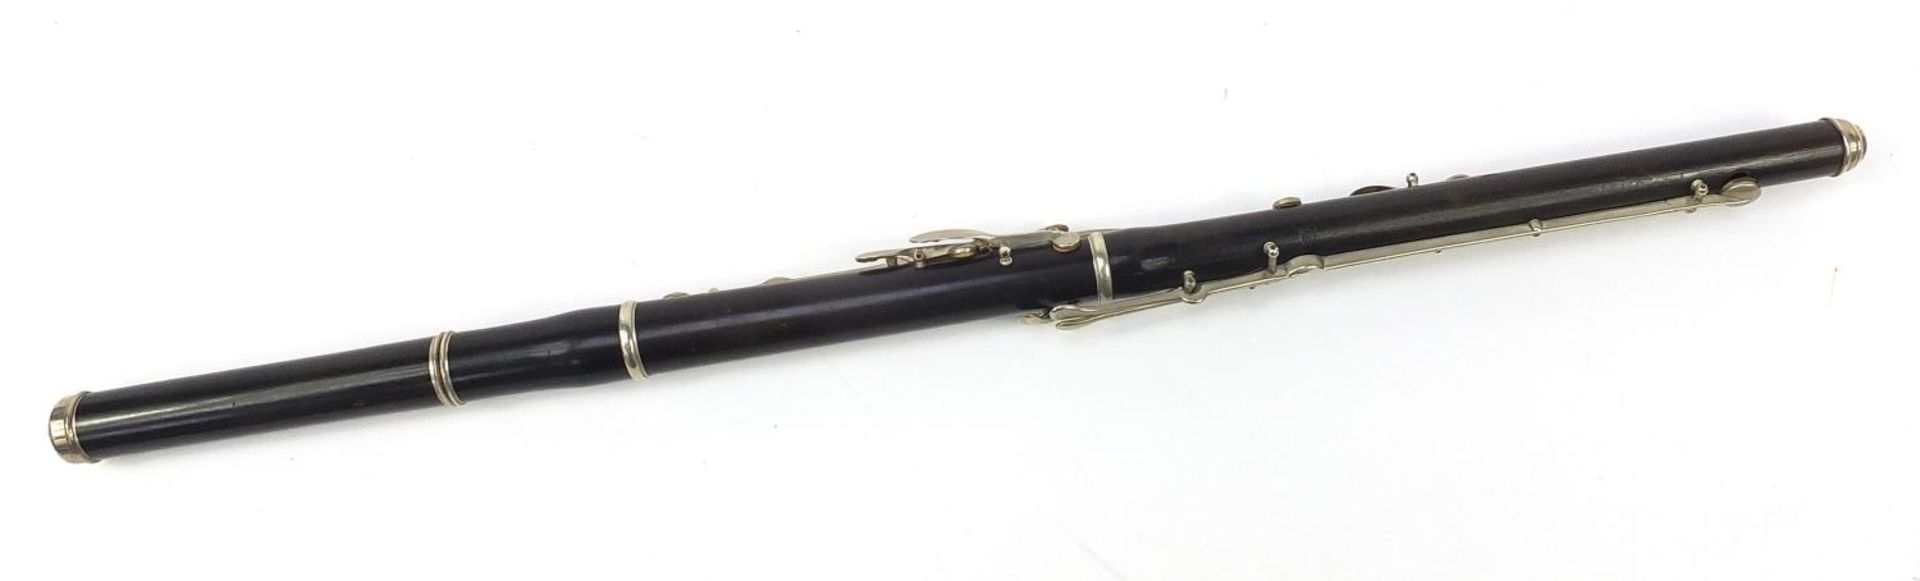 Jul Ludemann rosewood three piece flute with silver plated mounts and case - Image 6 of 9